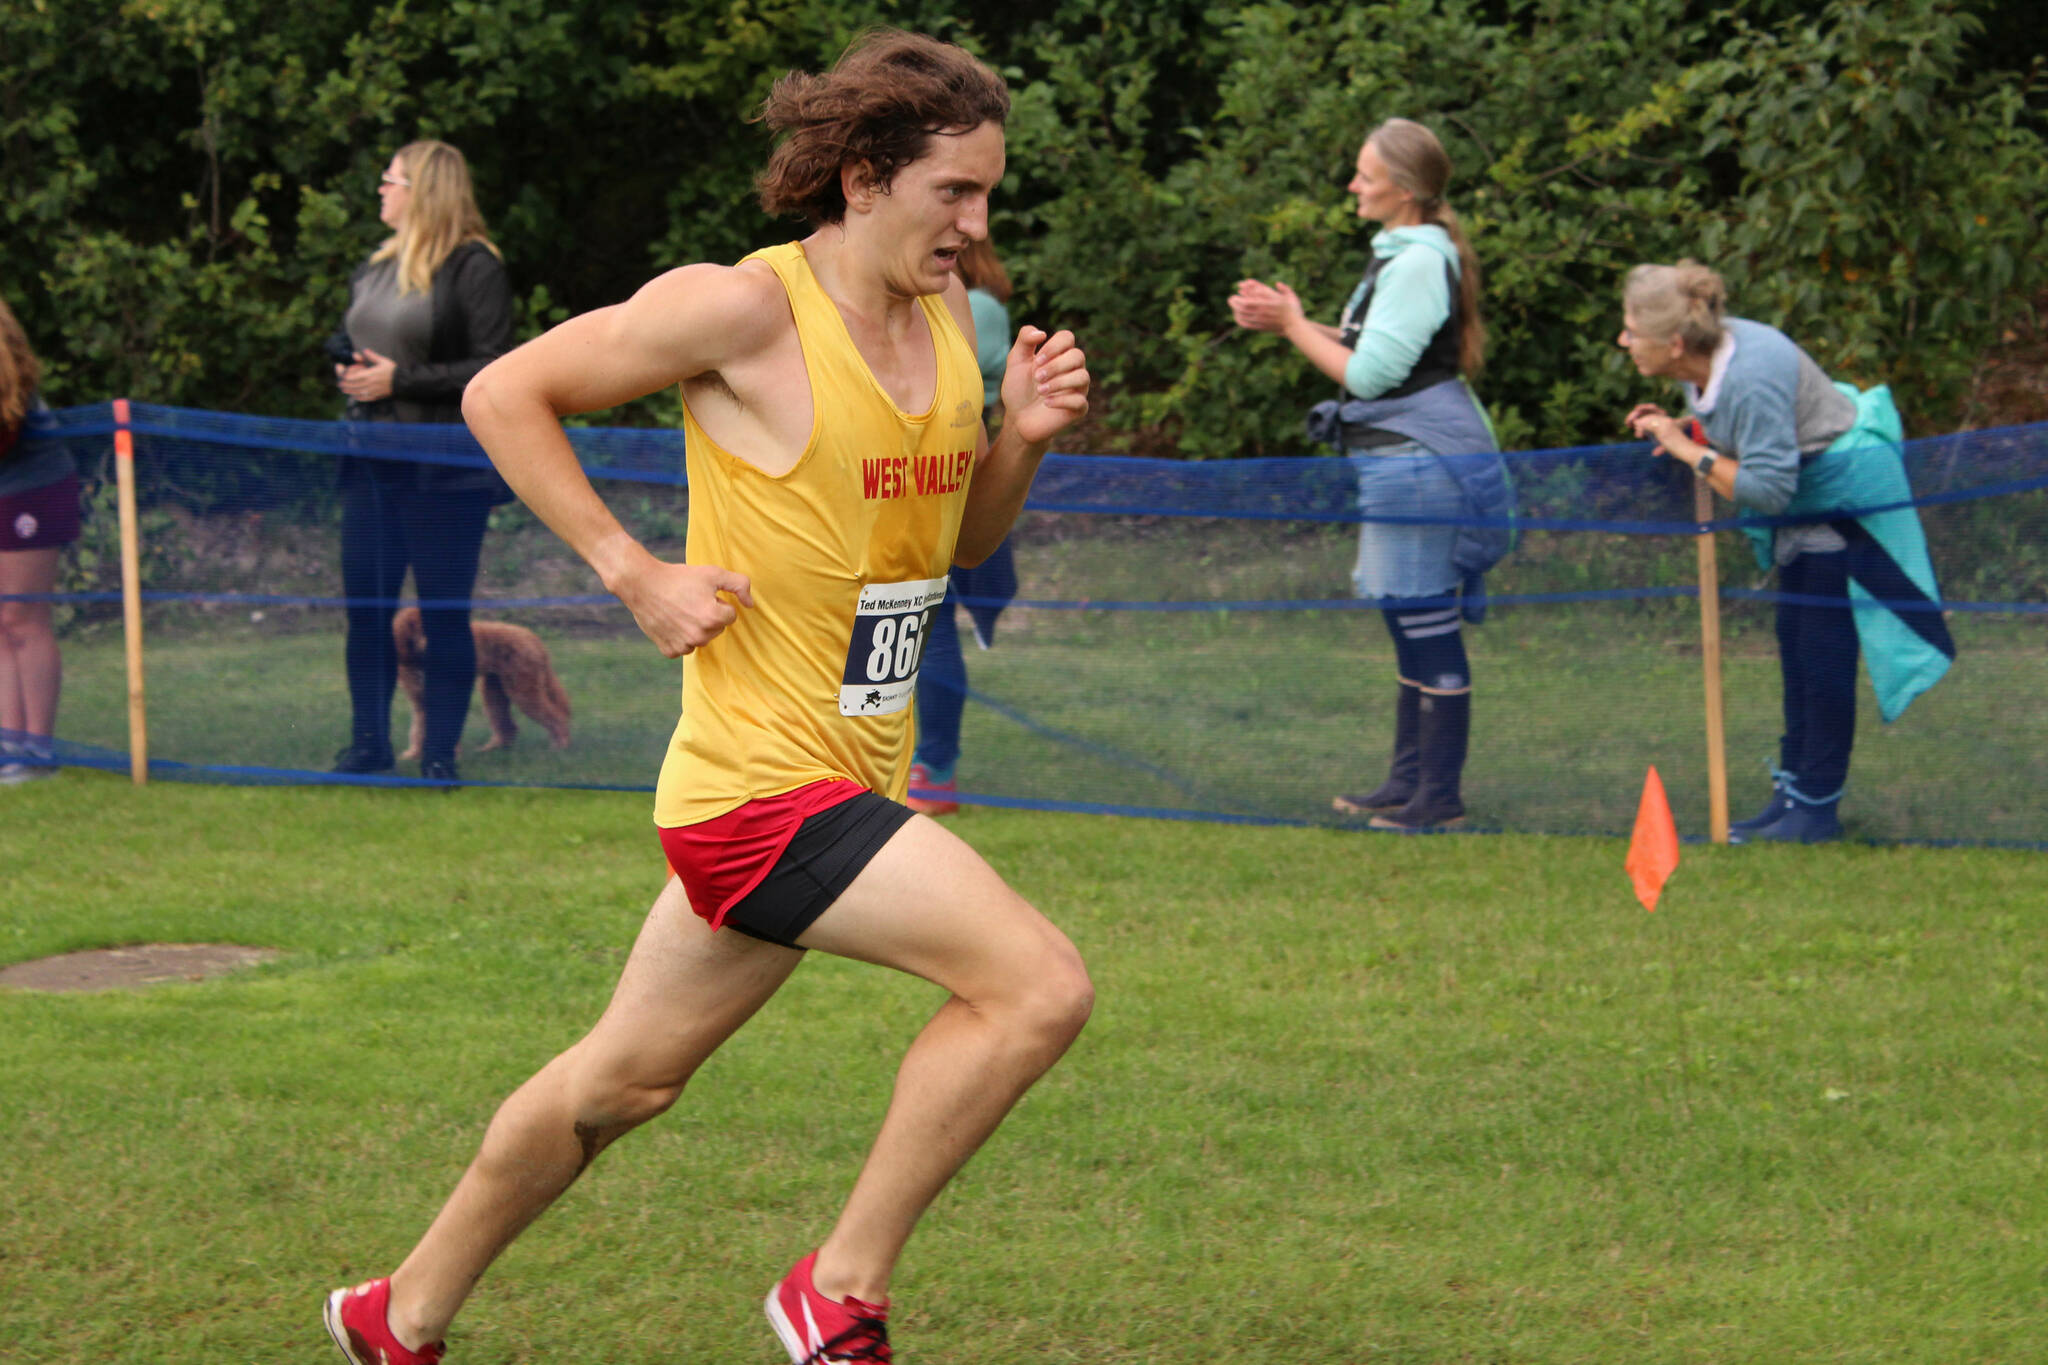 West Valley High School’s Shane Fisher races to victory at the 2022 Ted McKenney XC Running Invitational at Skyview Middle School on Saturday, Aug. 20, 2022 in Soldotna, Alaska. (Ashlyn O’Hara/Peninsula Clarion)